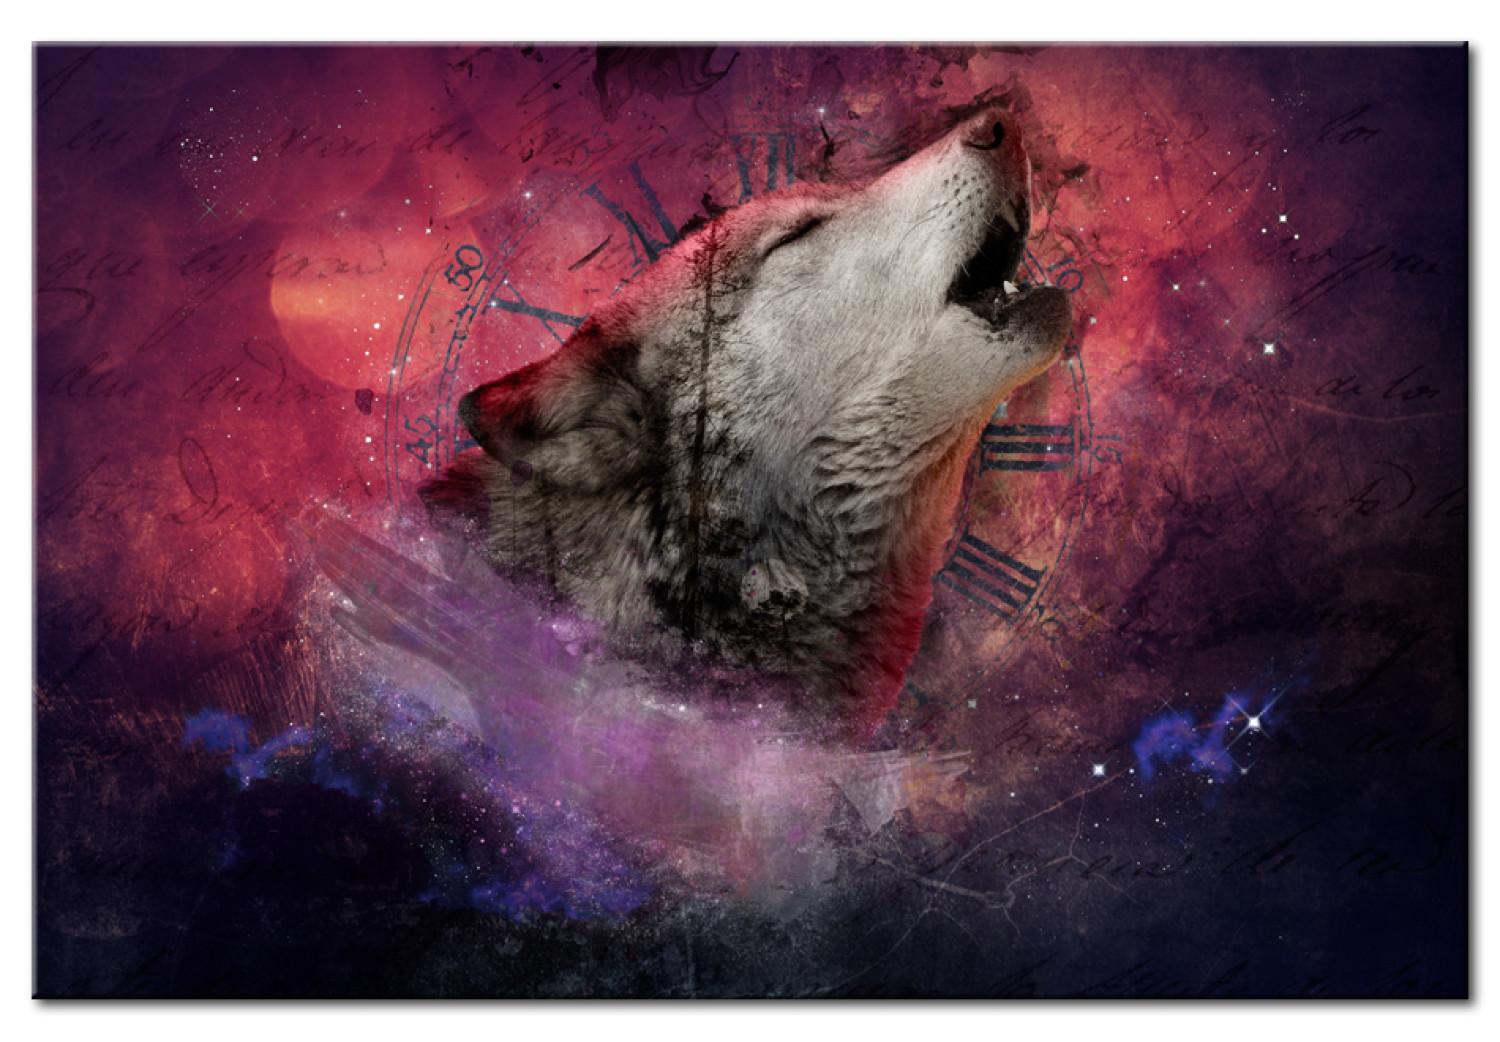 Canvas Time of Wolves